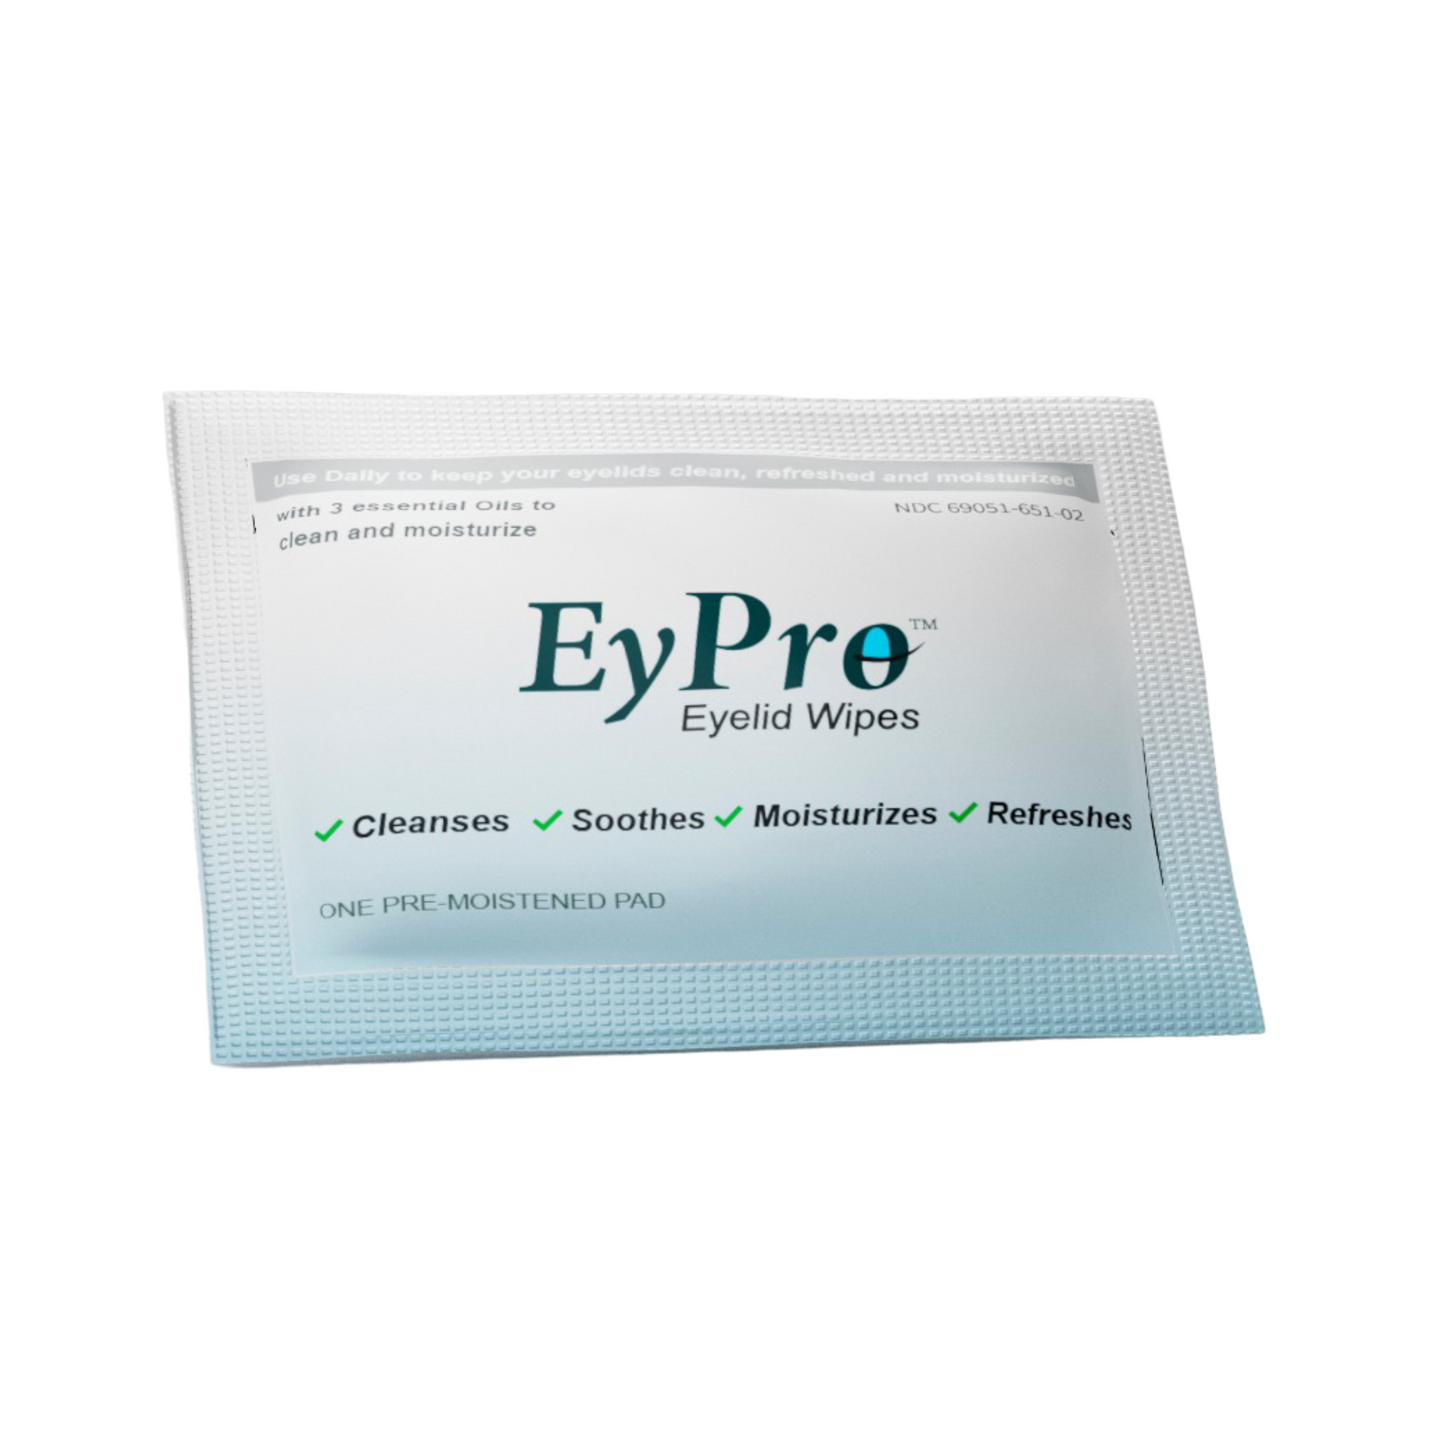 EyPro eyelid wipes that cleans and moisturizes your lashes and eyelids |  Helps to removes makeup easily